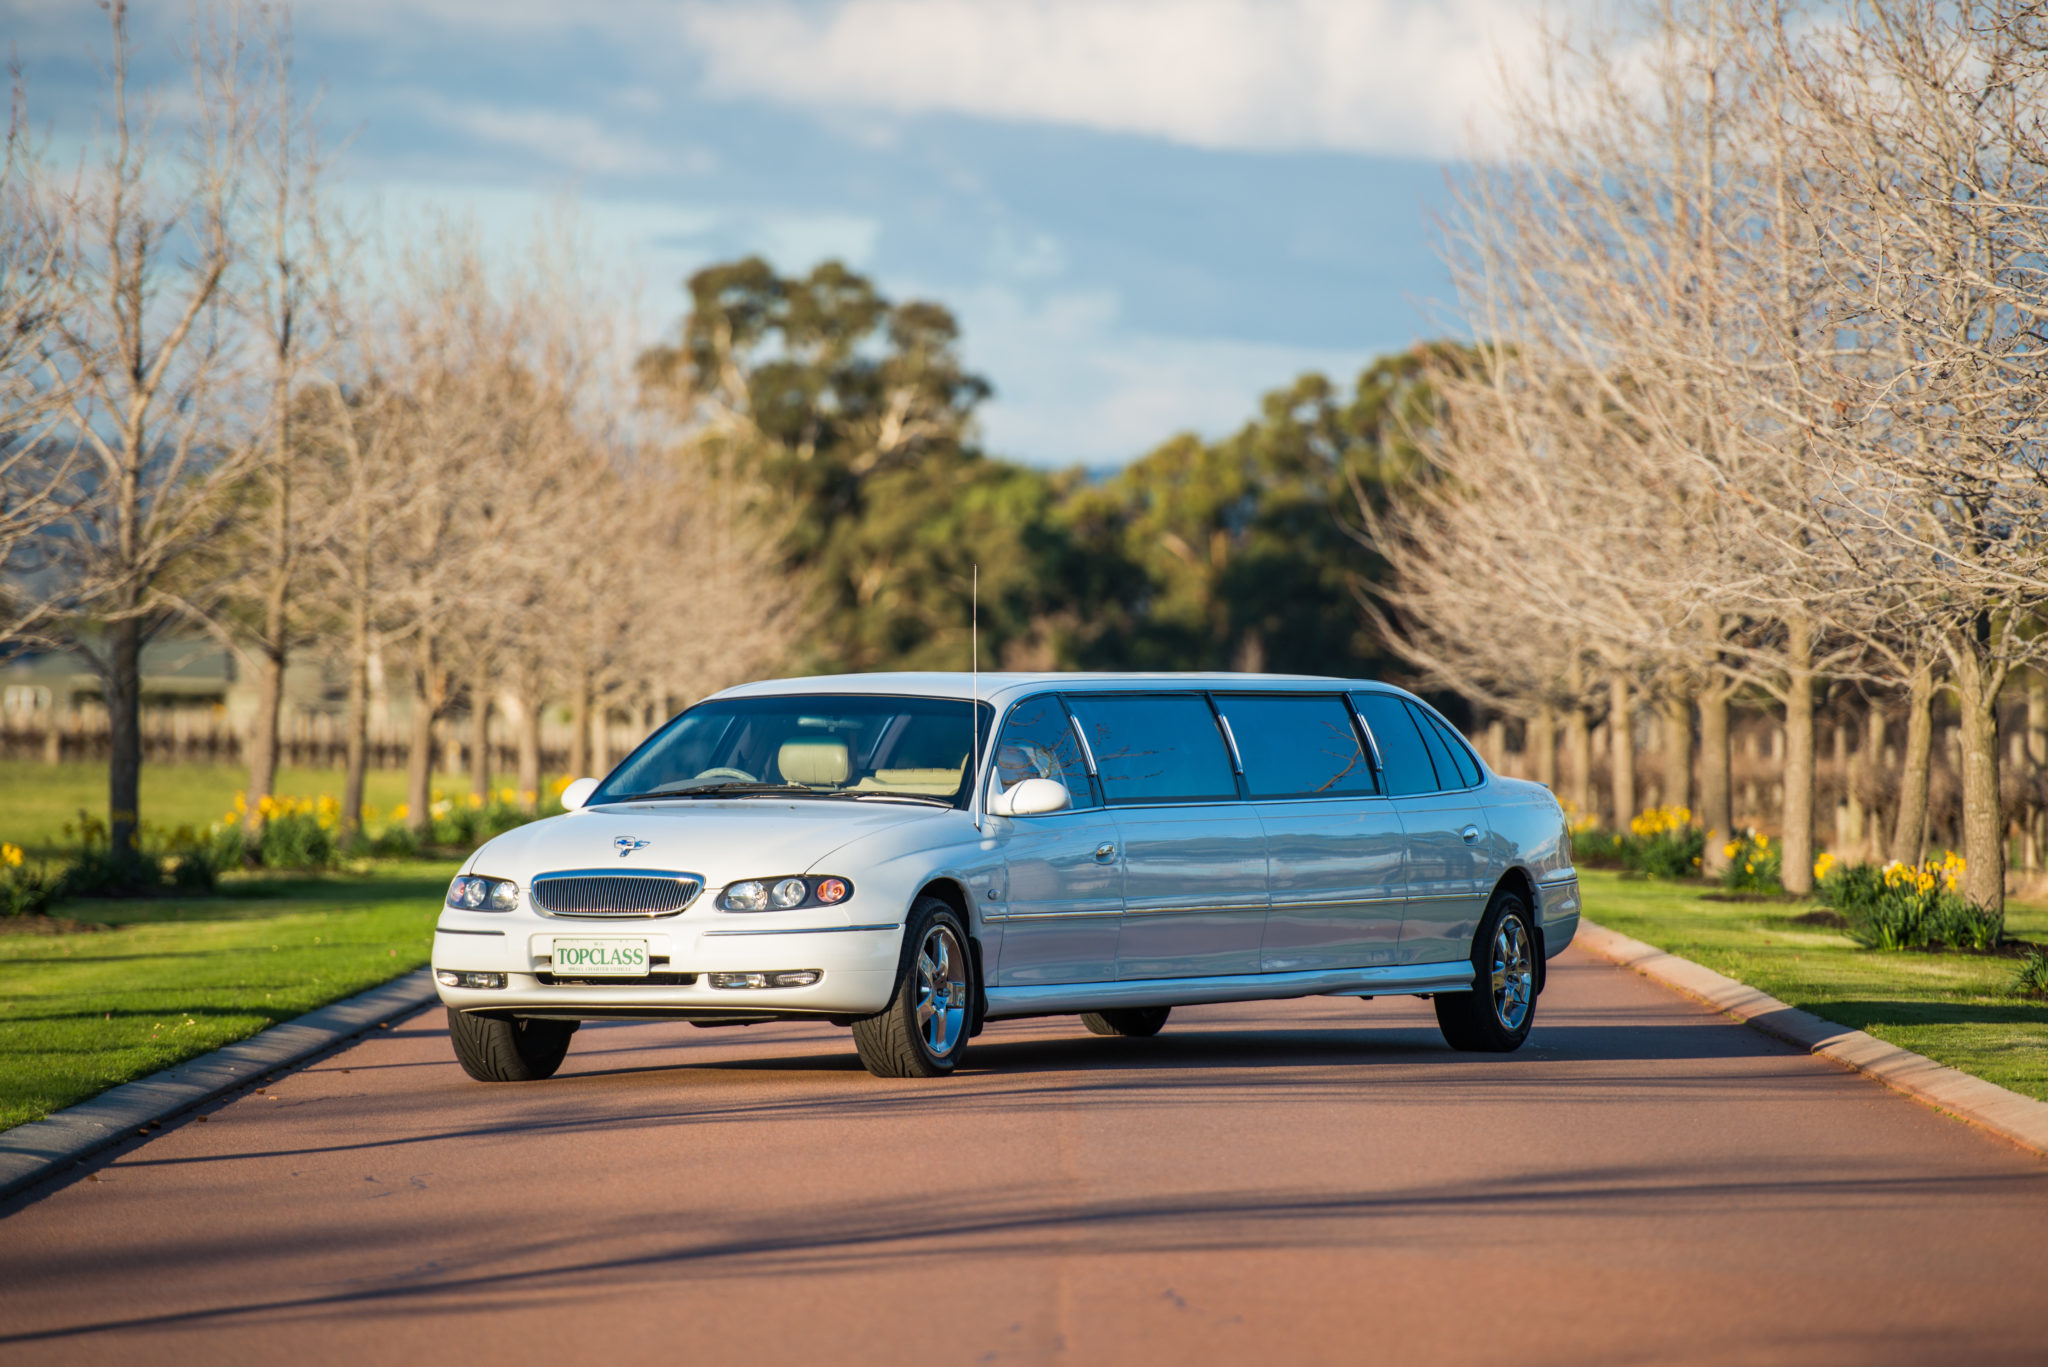 Holden Statesman Limousine, Limos and Classics, Perth Wedding cars, Perth Limo Hire, White Weddings, Holden Limo